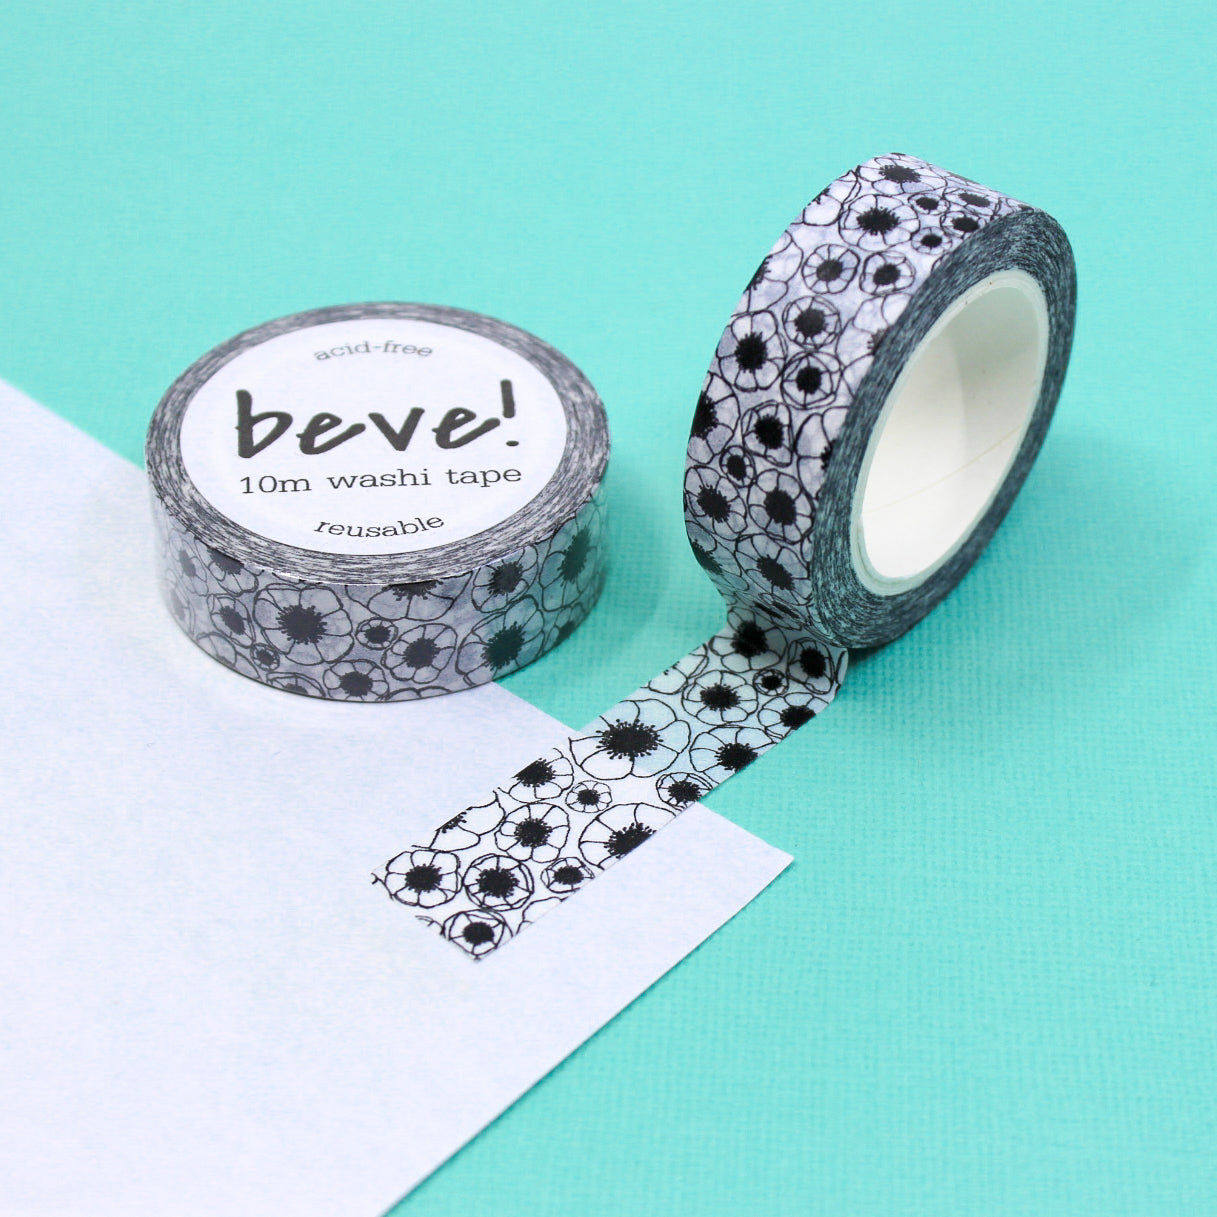 Elevate your creativity with our Black & White Abstract Anemone Washi Tape, featuring intricate and artistic anemone flower designs in a monochromatic palette. Ideal for adding a touch of abstract elegance to your projects. This tape is from Beve! and sold at BBB Supplies Craft Shop.